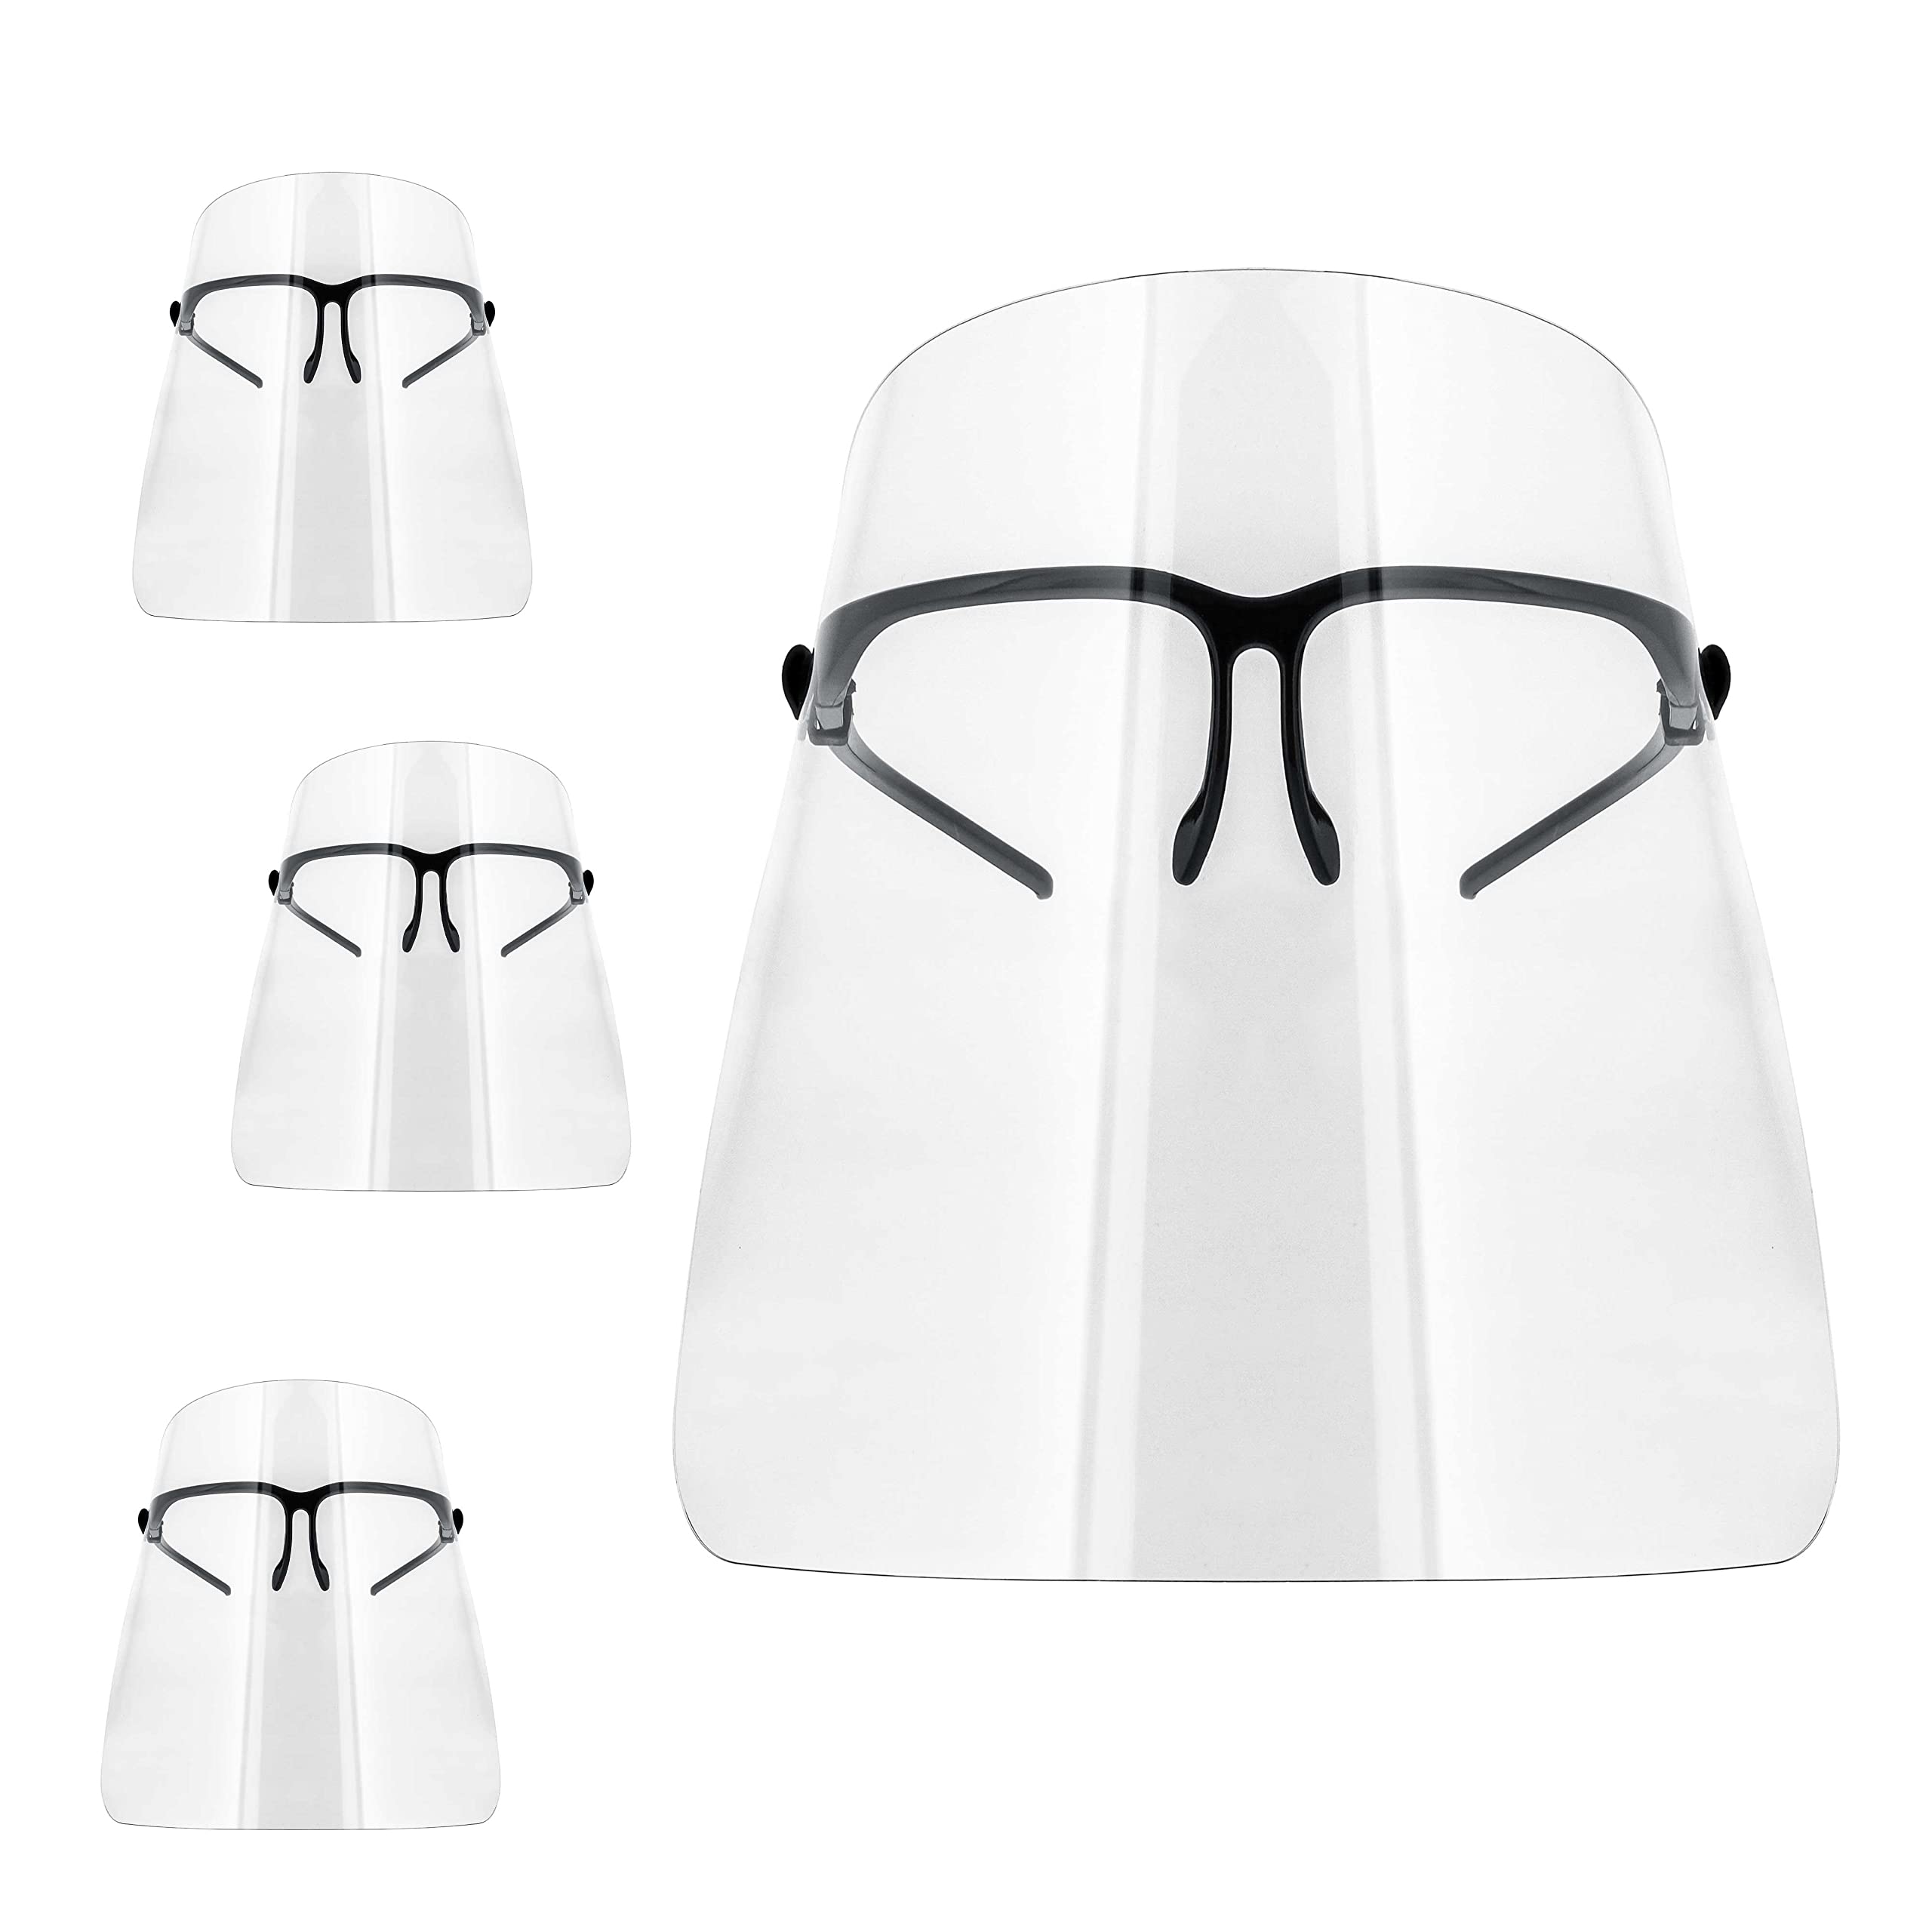 TCP Global Salon World Safety Face Shields with Glasses Frames (Pack of 10) - Ultra Clear Protective Full Face Shields